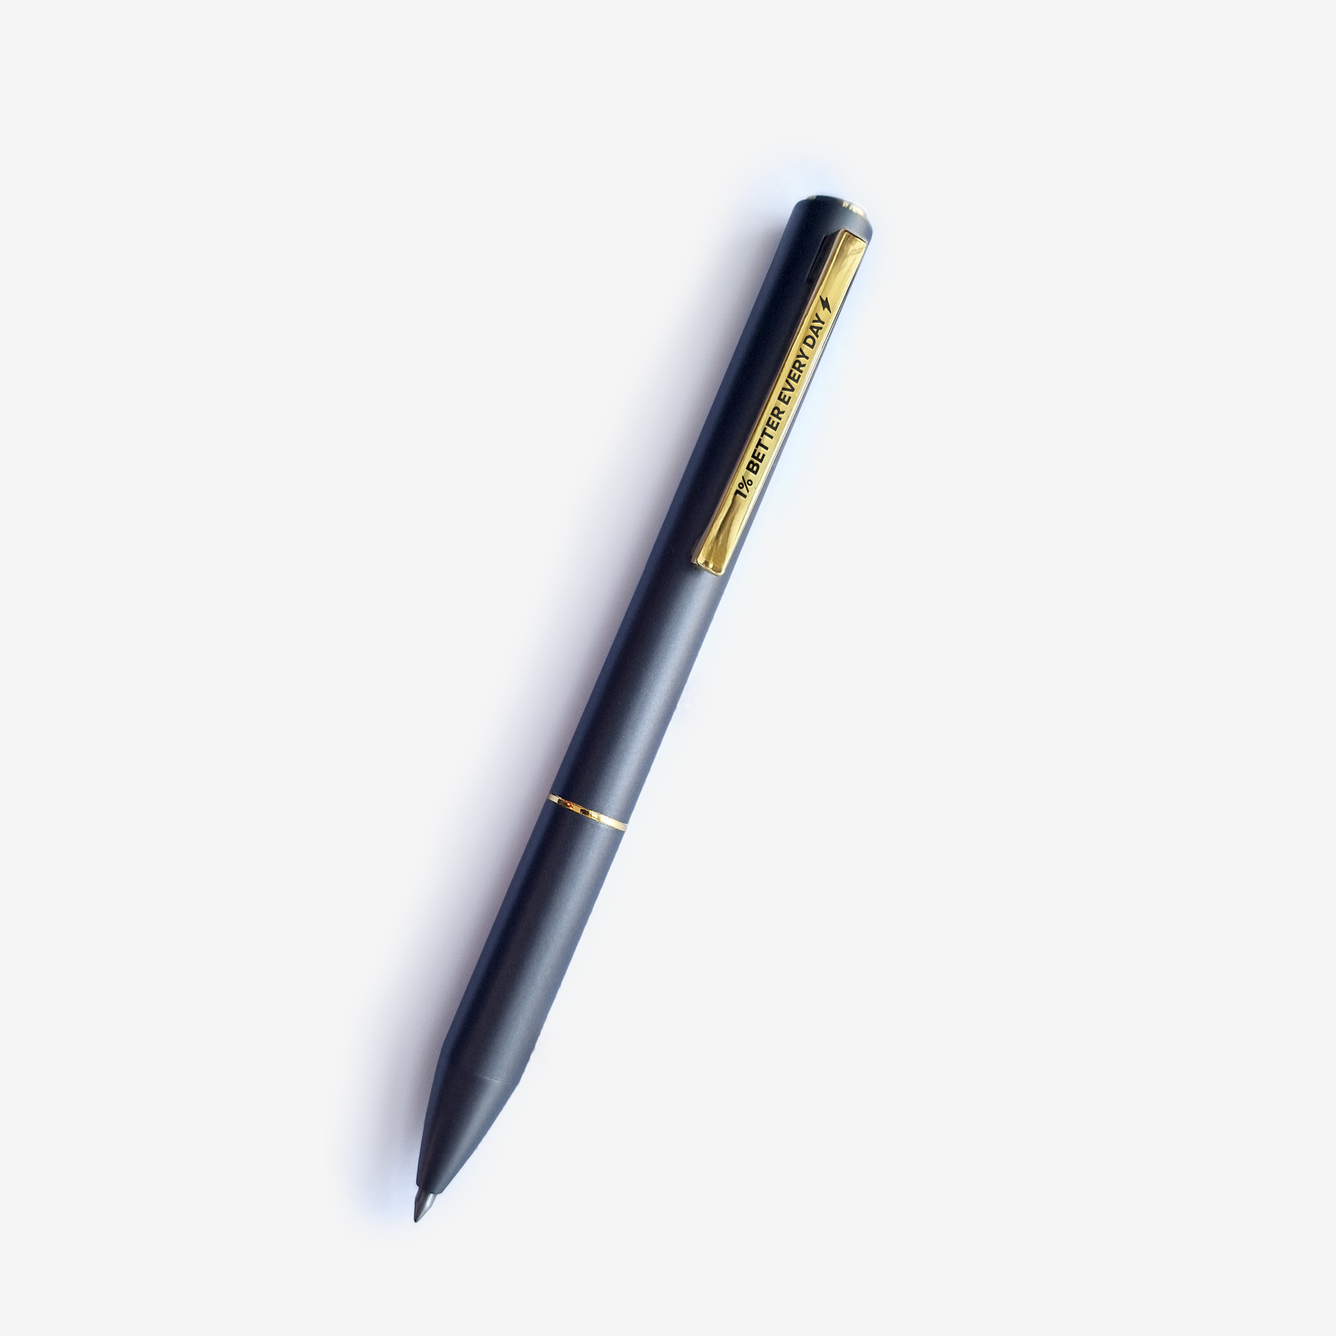 Finisher Pen (Limited Edition)